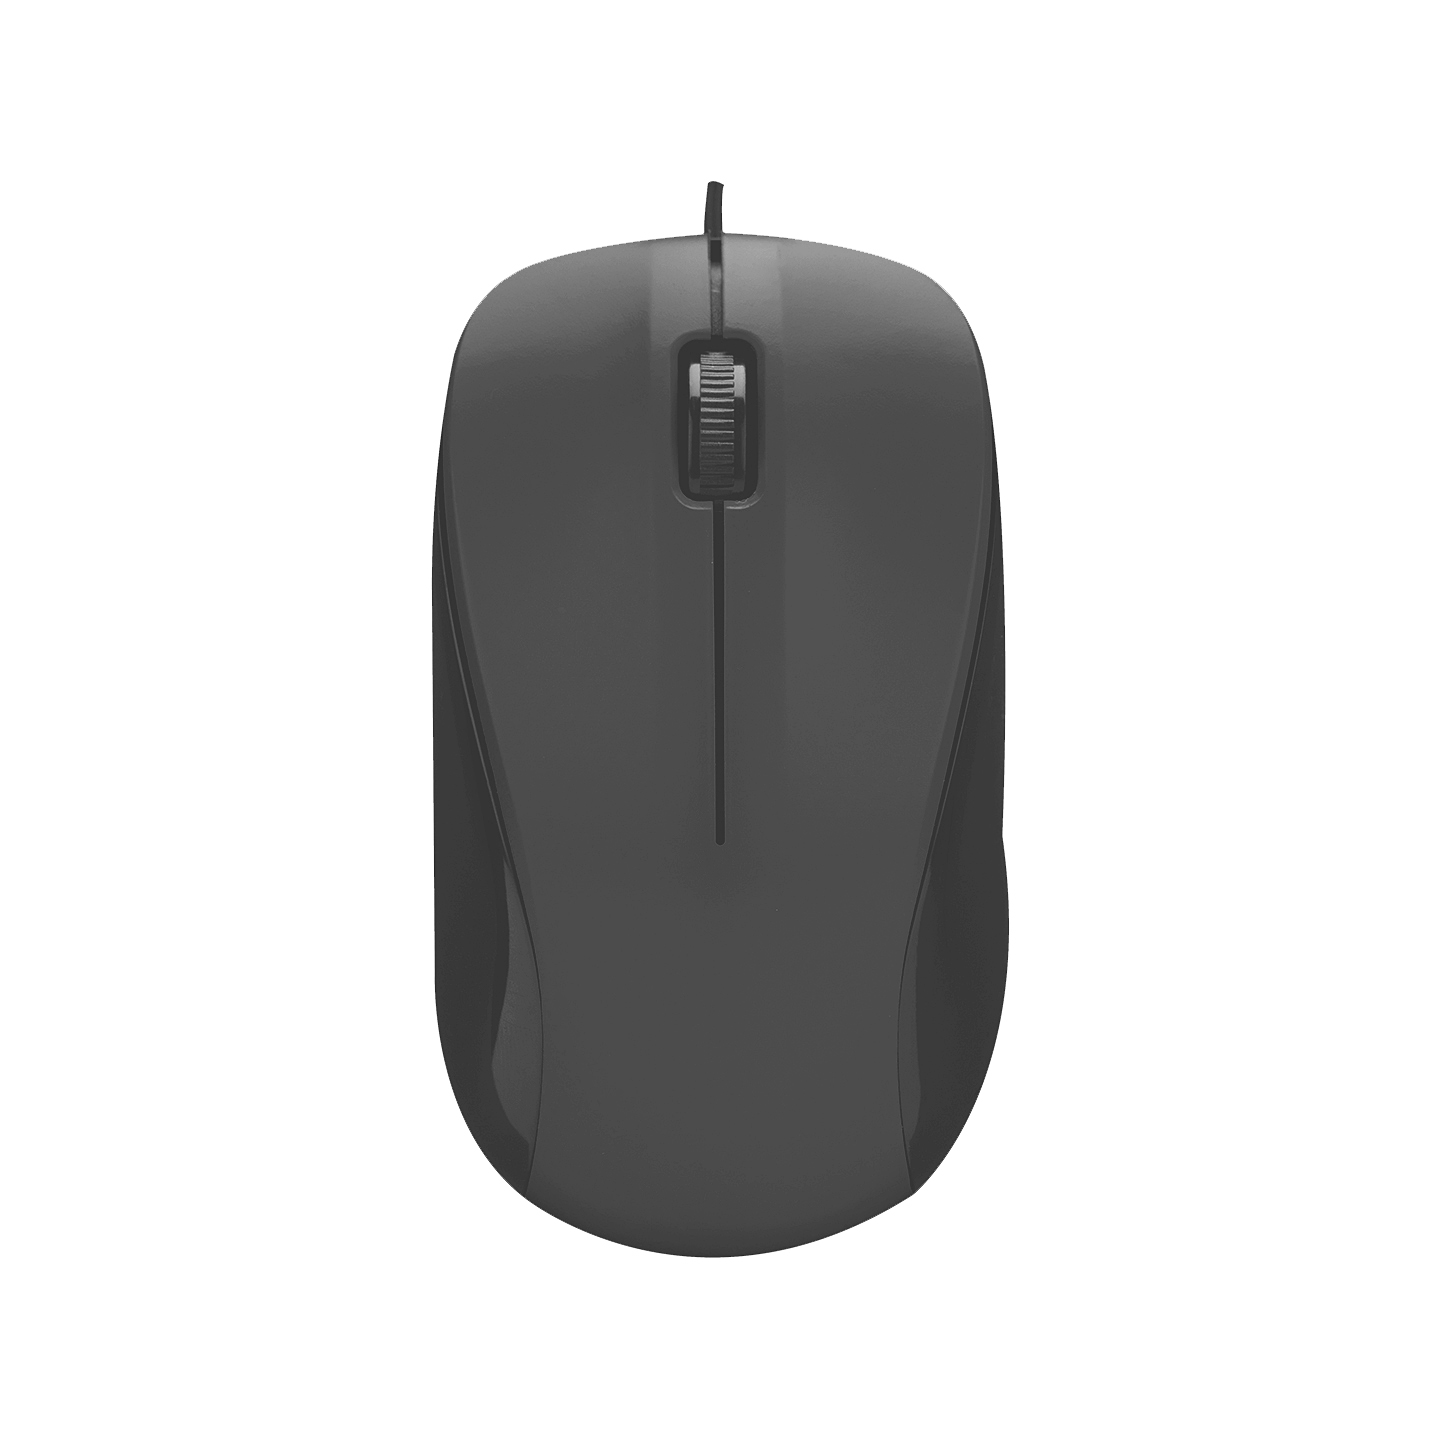 Everest SM-215 Usb Black 1.5m Usb Wired Mouse